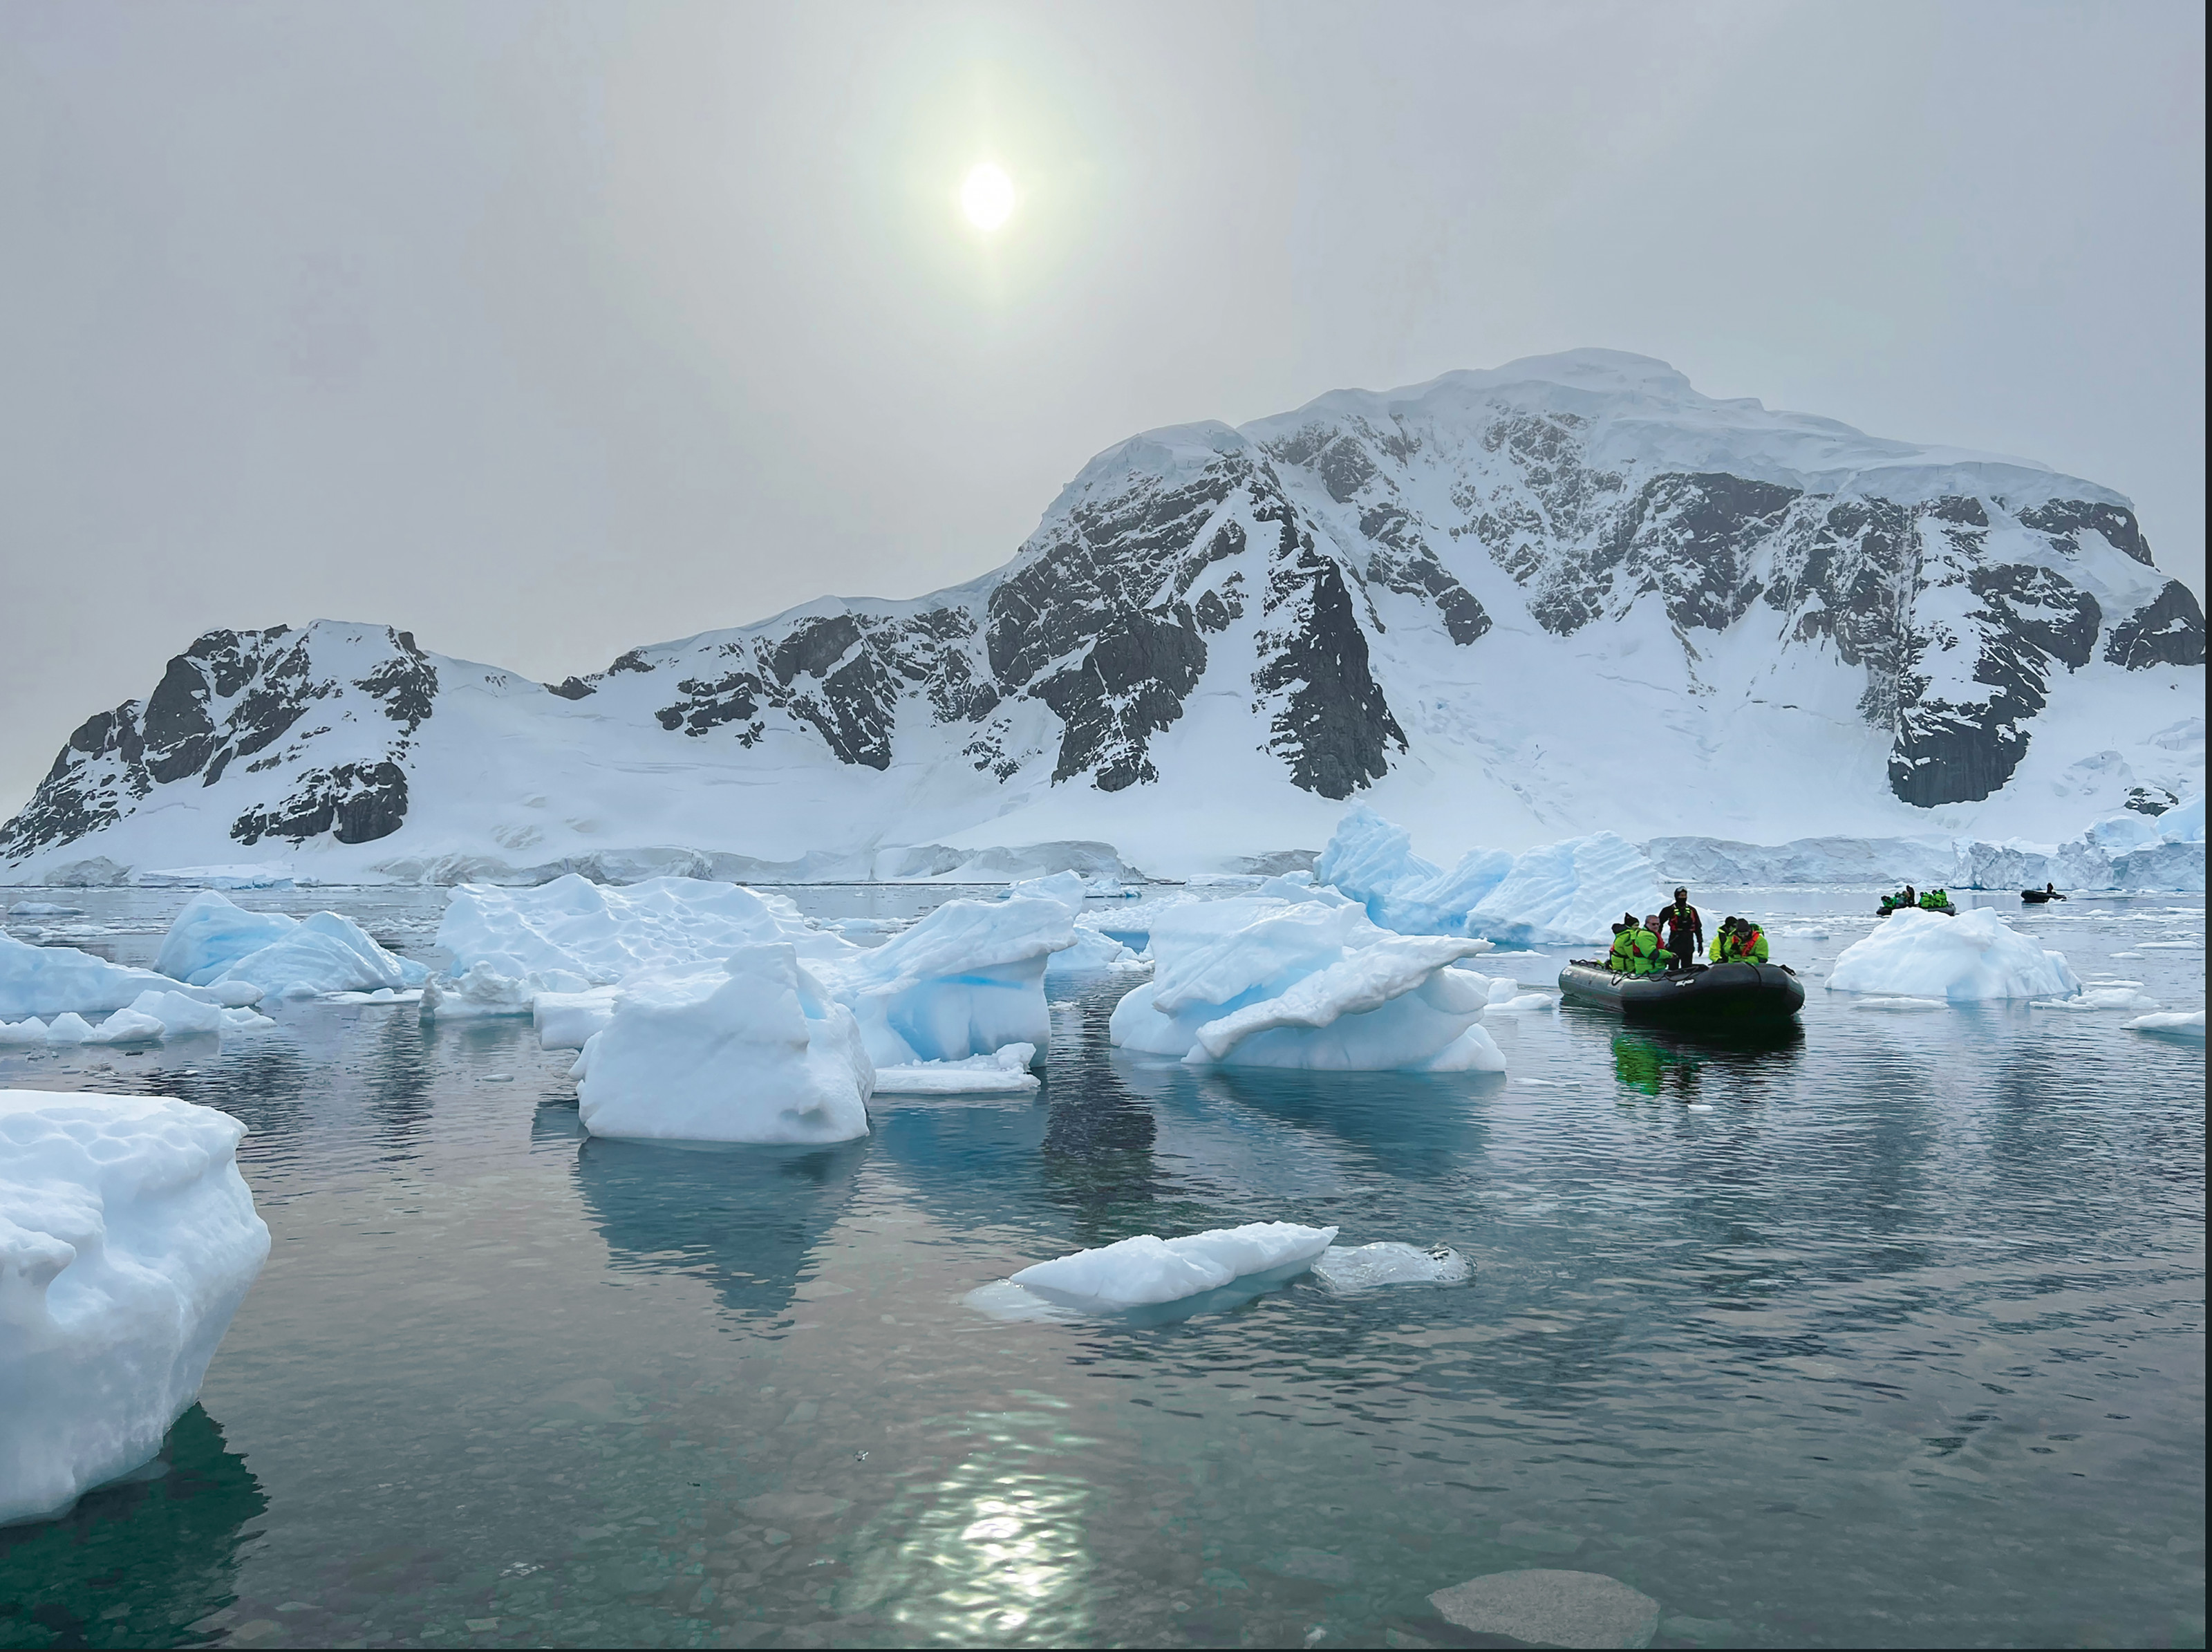    An Adventure in Antarctica     In January, a group of 37 intrepid travelers—led by Ken Clifton, professor of biology—experienced t...